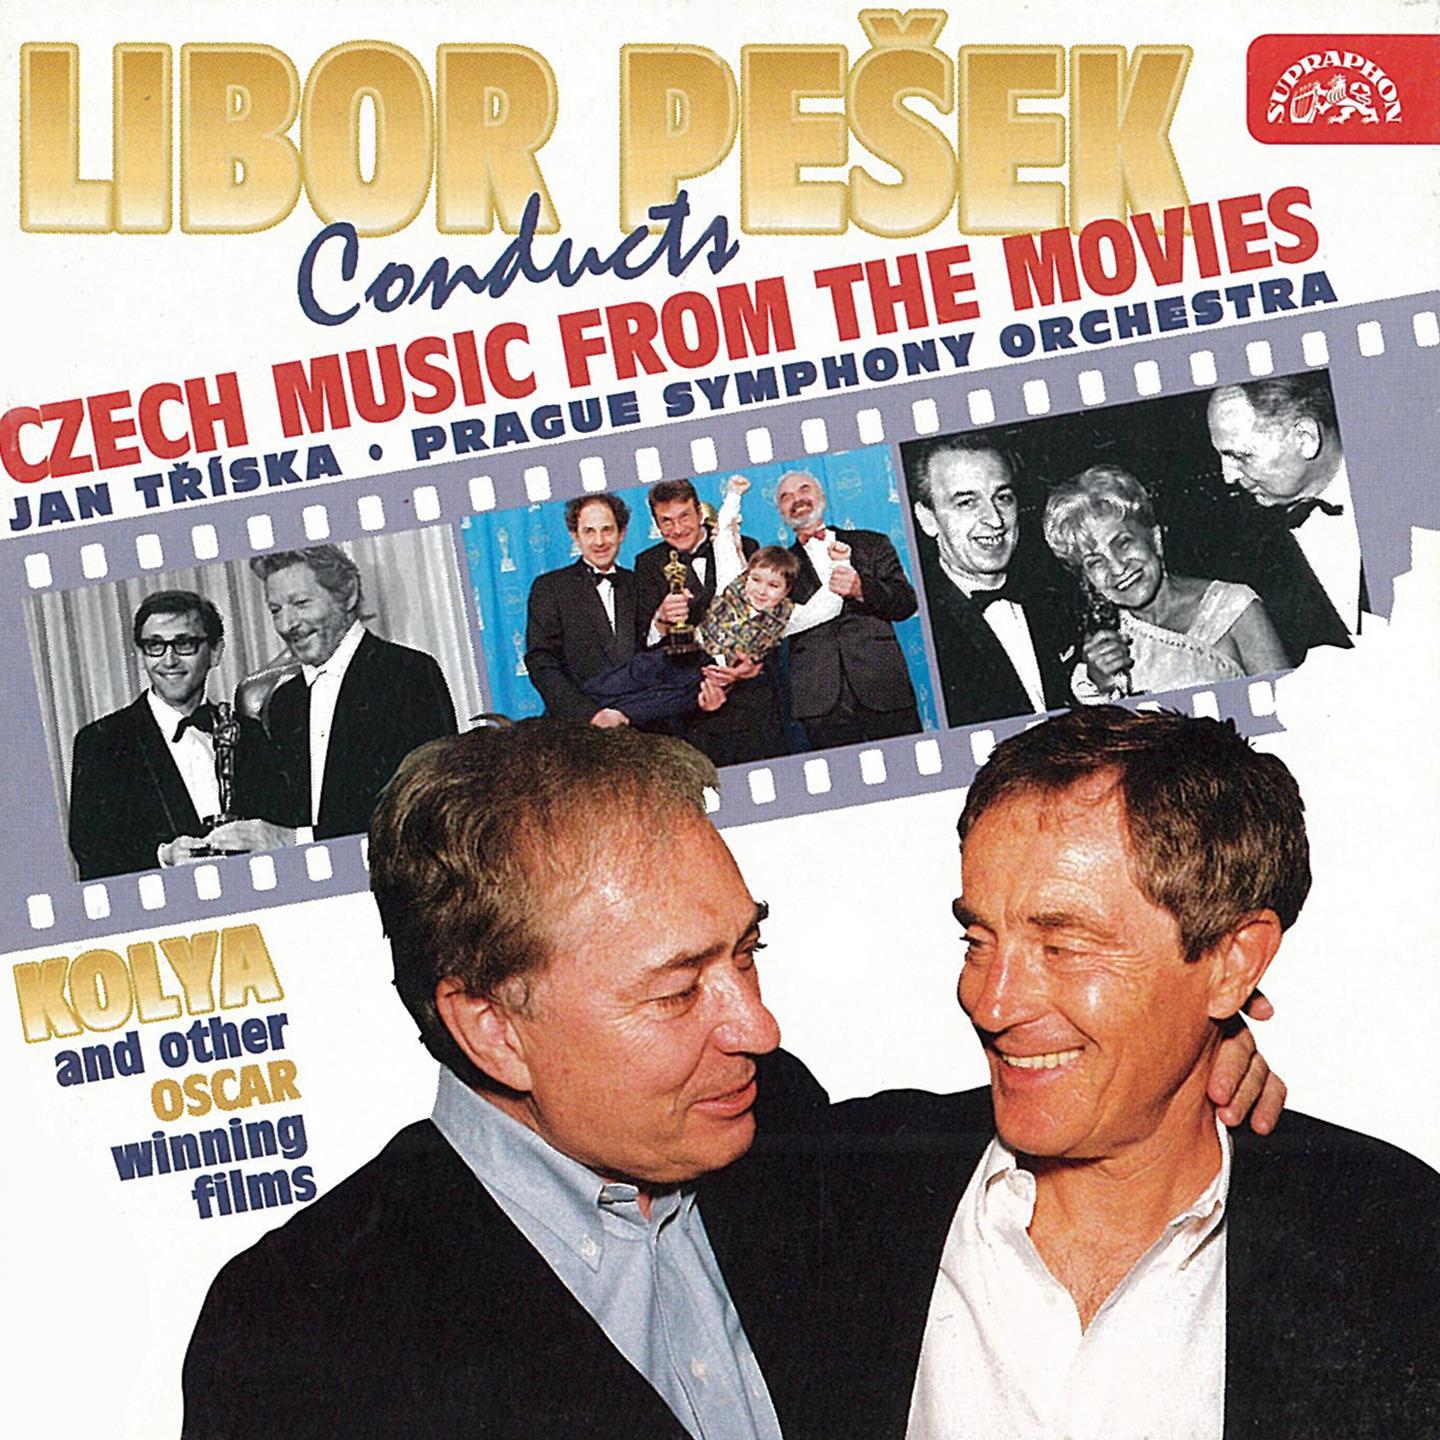 Libor Pe ek Conducts Czech Music from the Movies